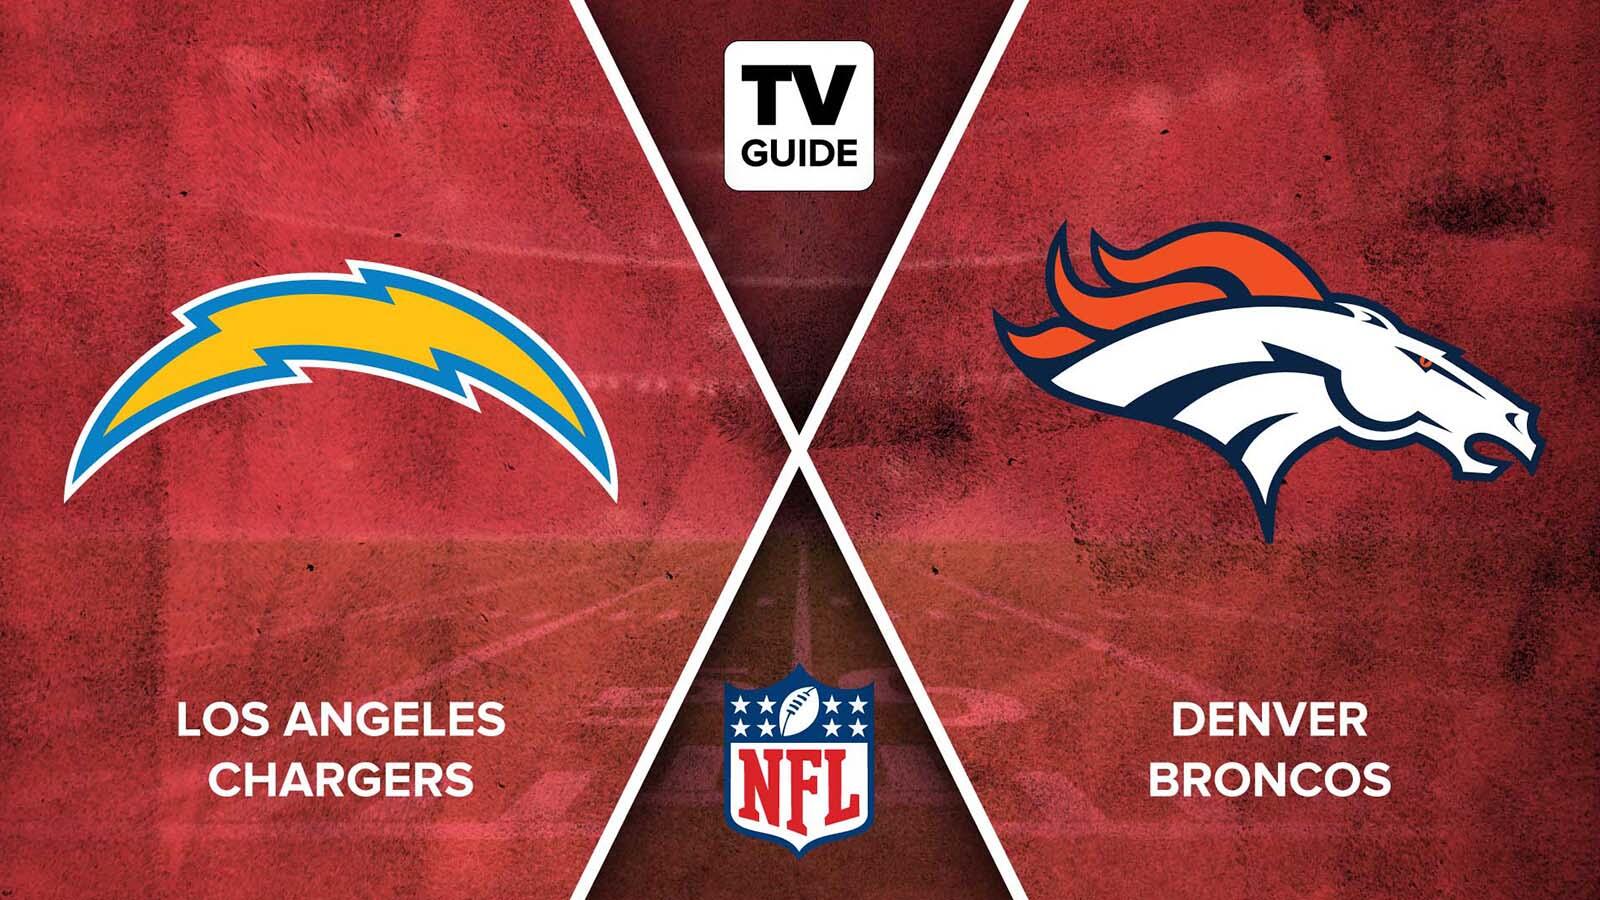 How to Watch Chargers vs. Broncos Live on 01/08 - TV Guide